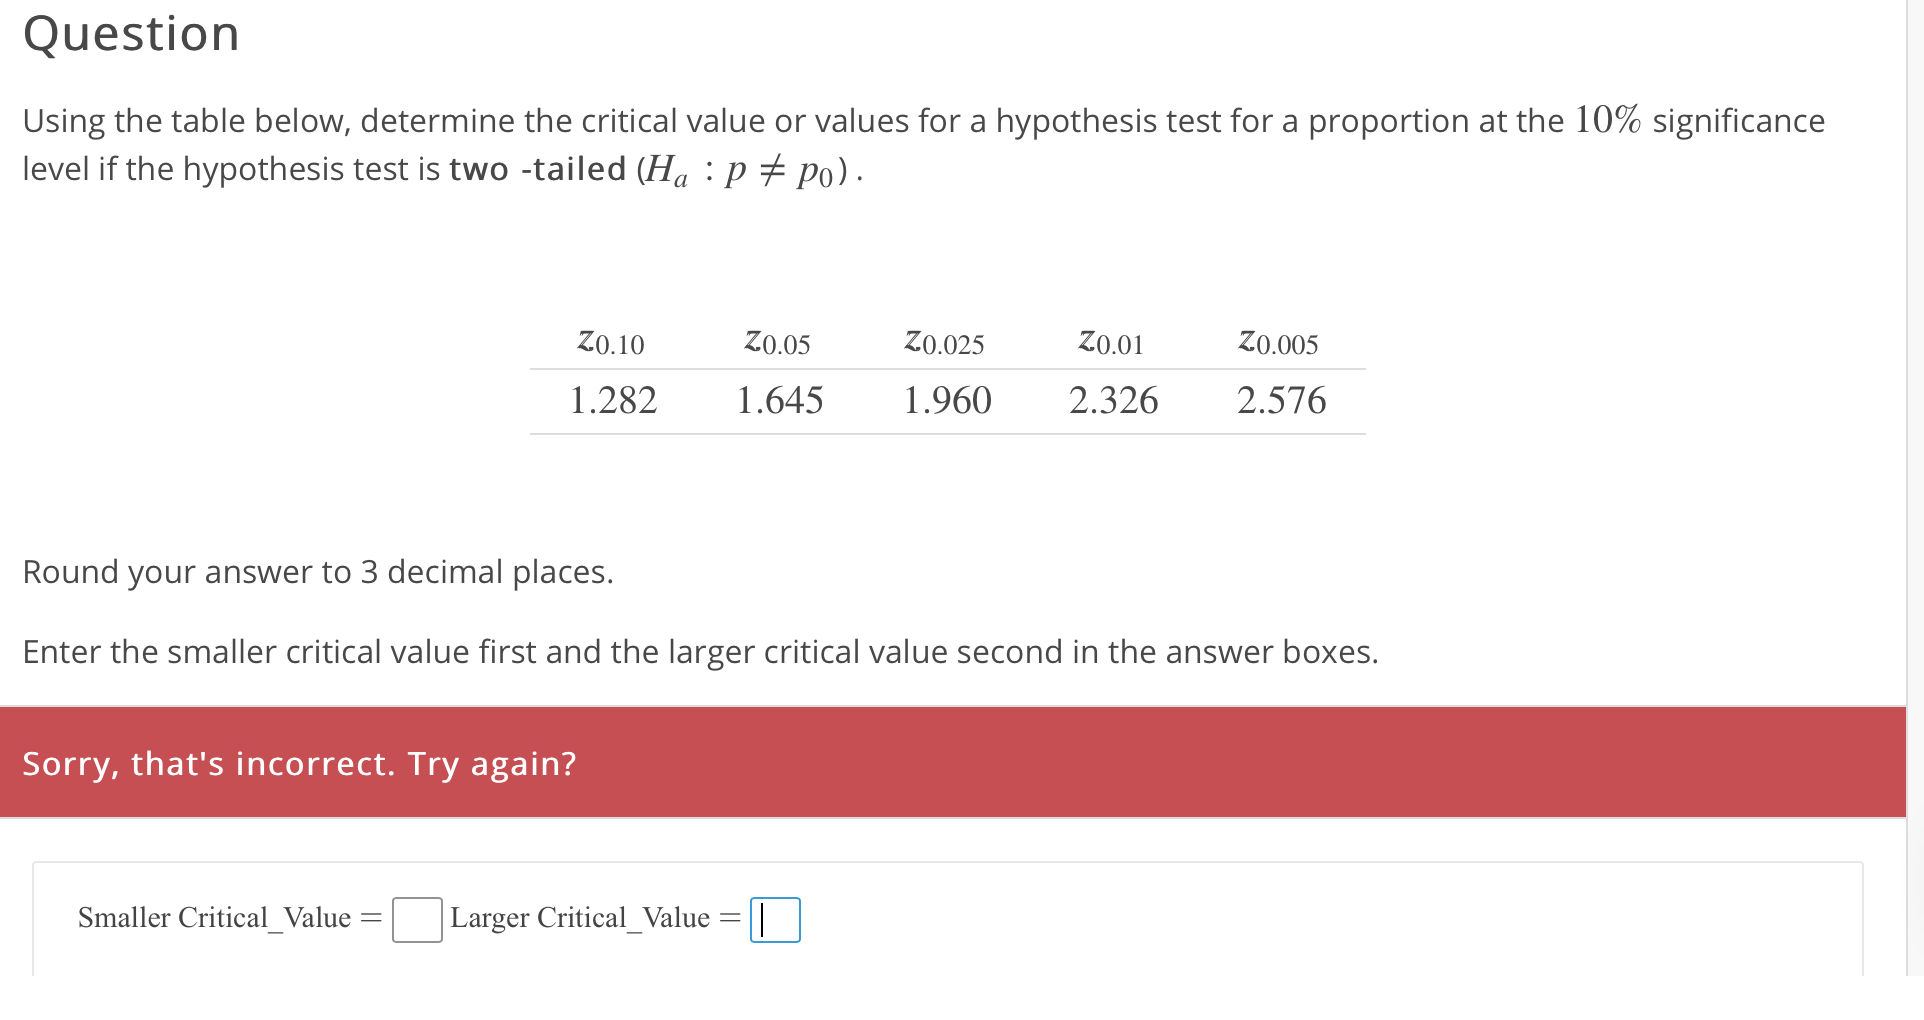 Question
Using the table below, determine the critical value or values for a hypothesis test for a proportion at the 10% significance
level if the hypothesis test is two-tailed (Ha : p * Po).
Z0.10
10
Zo.05
Z0.025
Z0.01
Z0.005
1.282 1.645 1.960 2.326 2.576
Round your answer to 3 decimal places.
Enter the smaller critical value first and the larger critical value second in the answer boxes.
Sorry, that's incorrect. Try again?
Smaller Critical-value = □
Larger Critical_Value
= D
